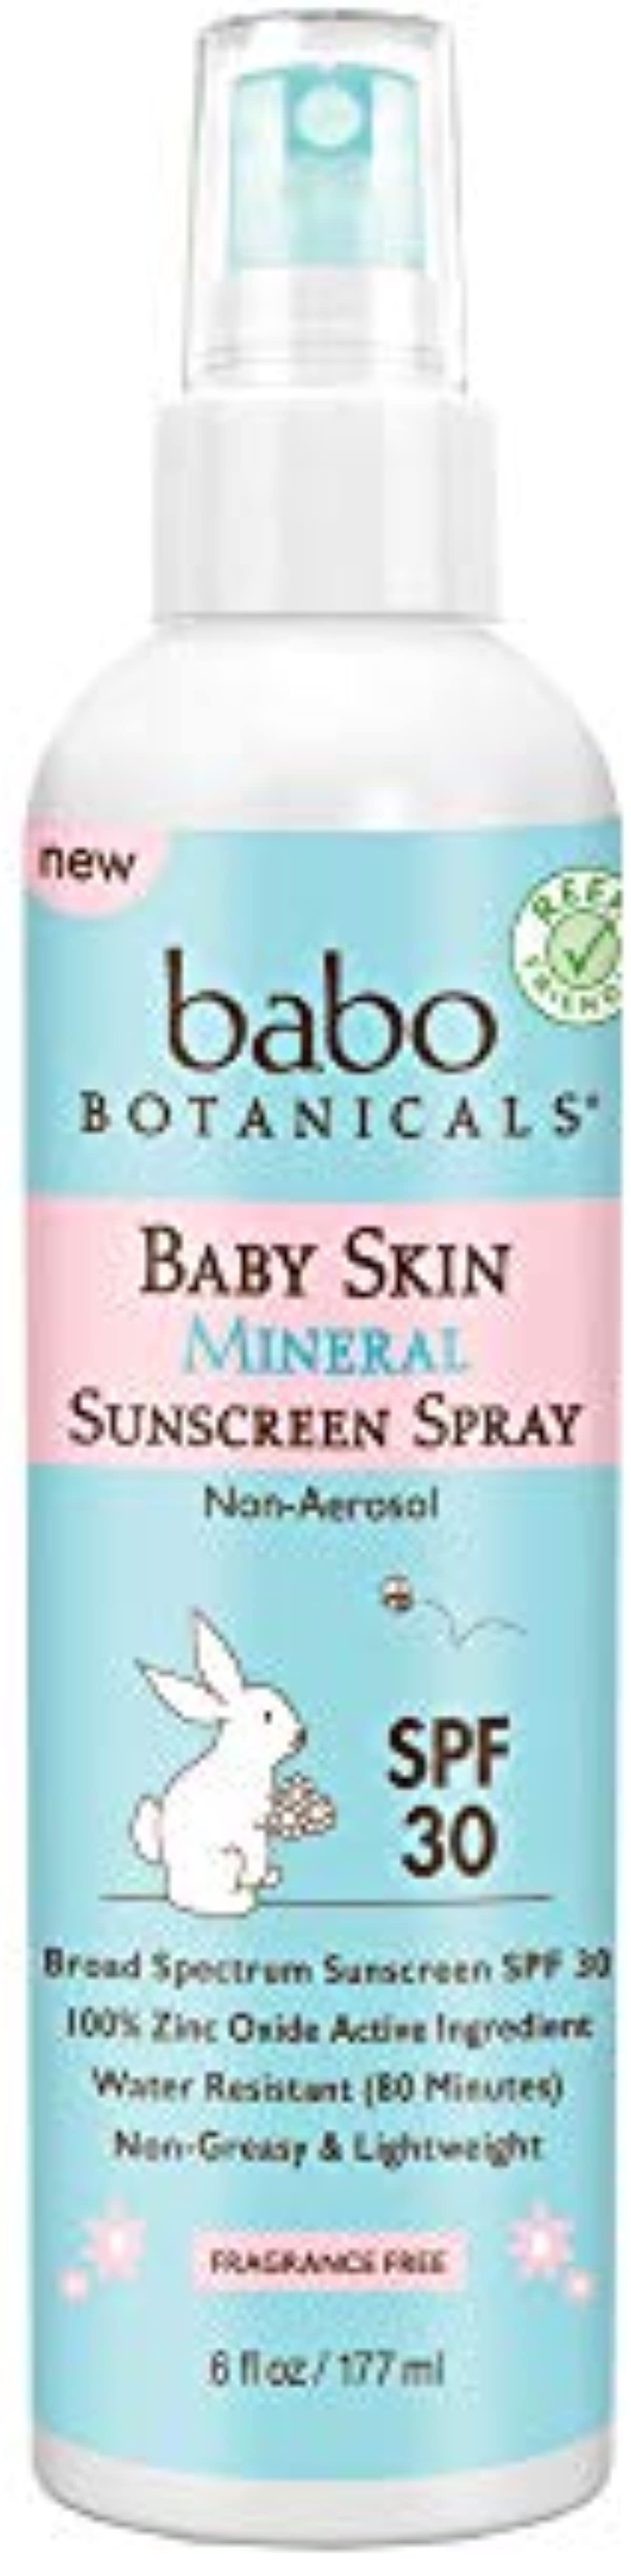 Babo Botanicals Baby Skin Mineral Sunscreen Spray SPF 30 with 100{203eefaf43322643ff2cbf7994bdbfdcacae03d40ed1a213a57e600e6d030d18} Zinc Oxide Active, Water-Resistant, Unscented, 6 Fl Oz